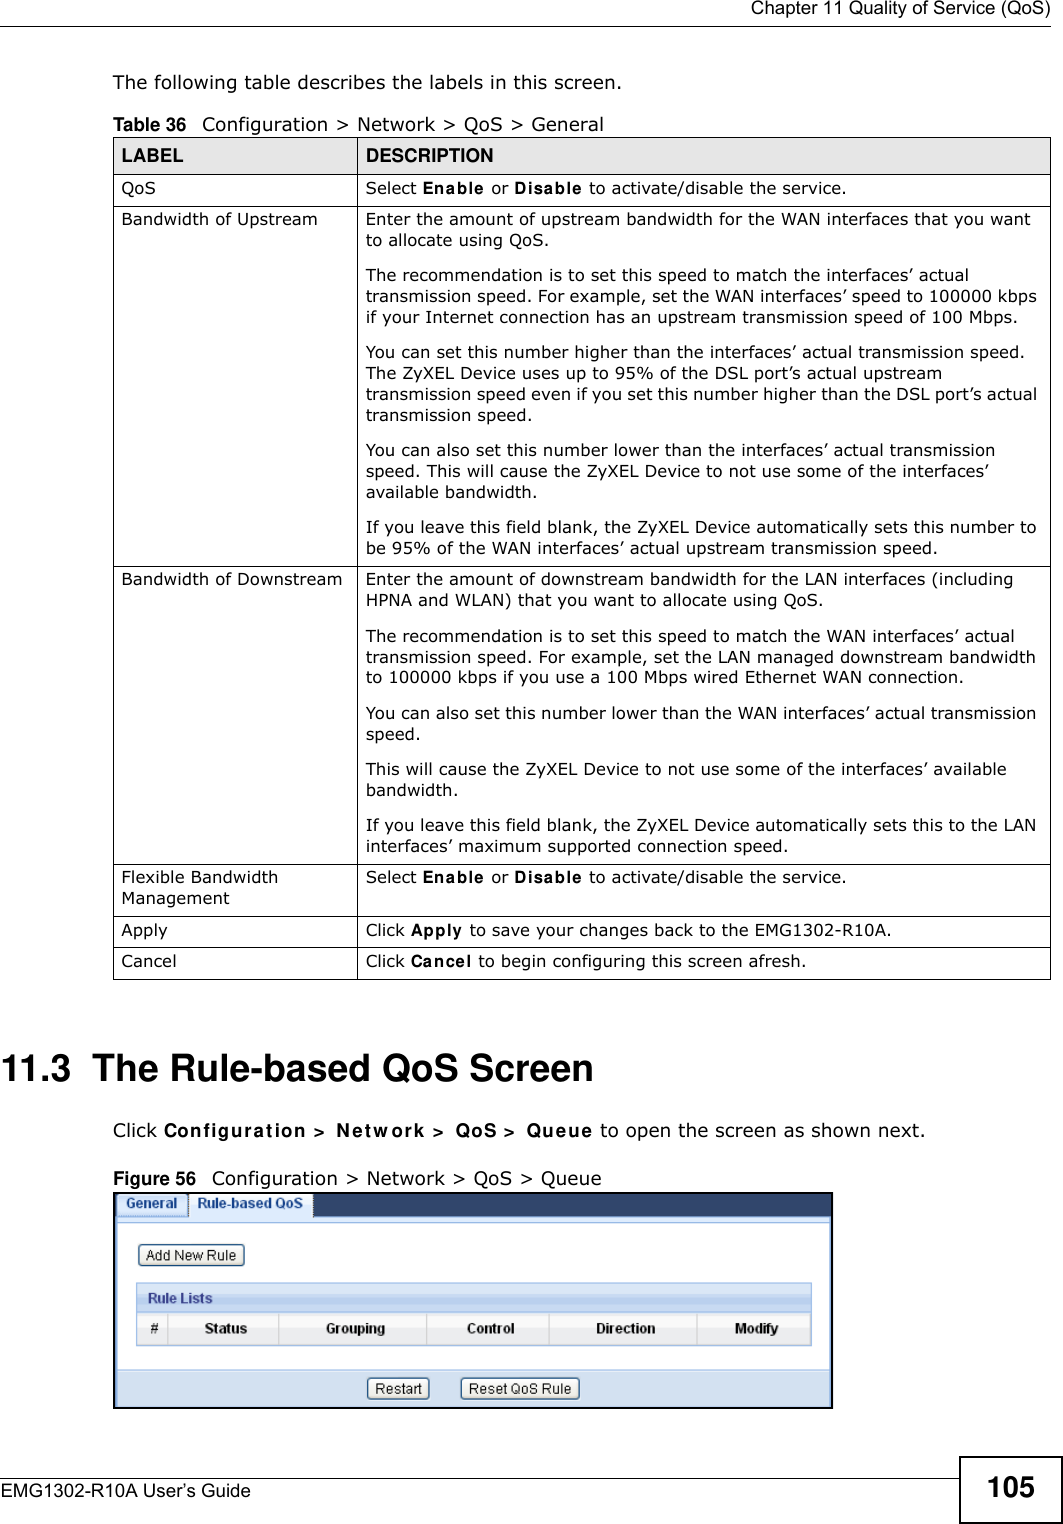  Chapter 11 Quality of Service (QoS)EMG1302-R10A User’s Guide 105The following table describes the labels in this screen.11.3  The Rule-based QoS ScreenClick Configu r at ion &gt;  N e t w or k  &gt;  QoS &gt;  Qu e ue to open the screen as shown next.Figure 56   Configuration &gt; Network &gt; QoS &gt; QueueTable 36   Configuration &gt; Network &gt; QoS &gt; GeneralLABEL DESCRIPTIONQoS Select Ena ble or Disa ble to activate/disable the service.Bandwidth of Upstream Enter the amount of upstream bandwidth for the WAN interfaces that you want to allocate using QoS.The recommendation is to set this speed to match the interfaces’ actual transmission speed. For example, set the WAN interfaces’ speed to 100000 kbps if your Internet connection has an upstream transmission speed of 100 Mbps.You can set this number higher than the interfaces’ actual transmission speed. The ZyXEL Device uses up to 95% of the DSL port’s actual upstream transmission speed even if you set this number higher than the DSL port’s actual transmission speed.You can also set this number lower than the interfaces’ actual transmission speed. This will cause the ZyXEL Device to not use some of the interfaces’ available bandwidth.If you leave this field blank, the ZyXEL Device automatically sets this number to be 95% of the WAN interfaces’ actual upstream transmission speed.Bandwidth of Downstream Enter the amount of downstream bandwidth for the LAN interfaces (including HPNA and WLAN) that you want to allocate using QoS.The recommendation is to set this speed to match the WAN interfaces’ actual transmission speed. For example, set the LAN managed downstream bandwidth to 100000 kbps if you use a 100 Mbps wired Ethernet WAN connection.You can also set this number lower than the WAN interfaces’ actual transmission speed.This will cause the ZyXEL Device to not use some of the interfaces’ available bandwidth.If you leave this field blank, the ZyXEL Device automatically sets this to the LAN interfaces’ maximum supported connection speed.Flexible Bandwidth ManagementSelect Enable or D isable to activate/disable the service.Apply Click Apply  to save your changes back to the EMG1302-R10A.Cancel Click Cancel to begin configuring this screen afresh.